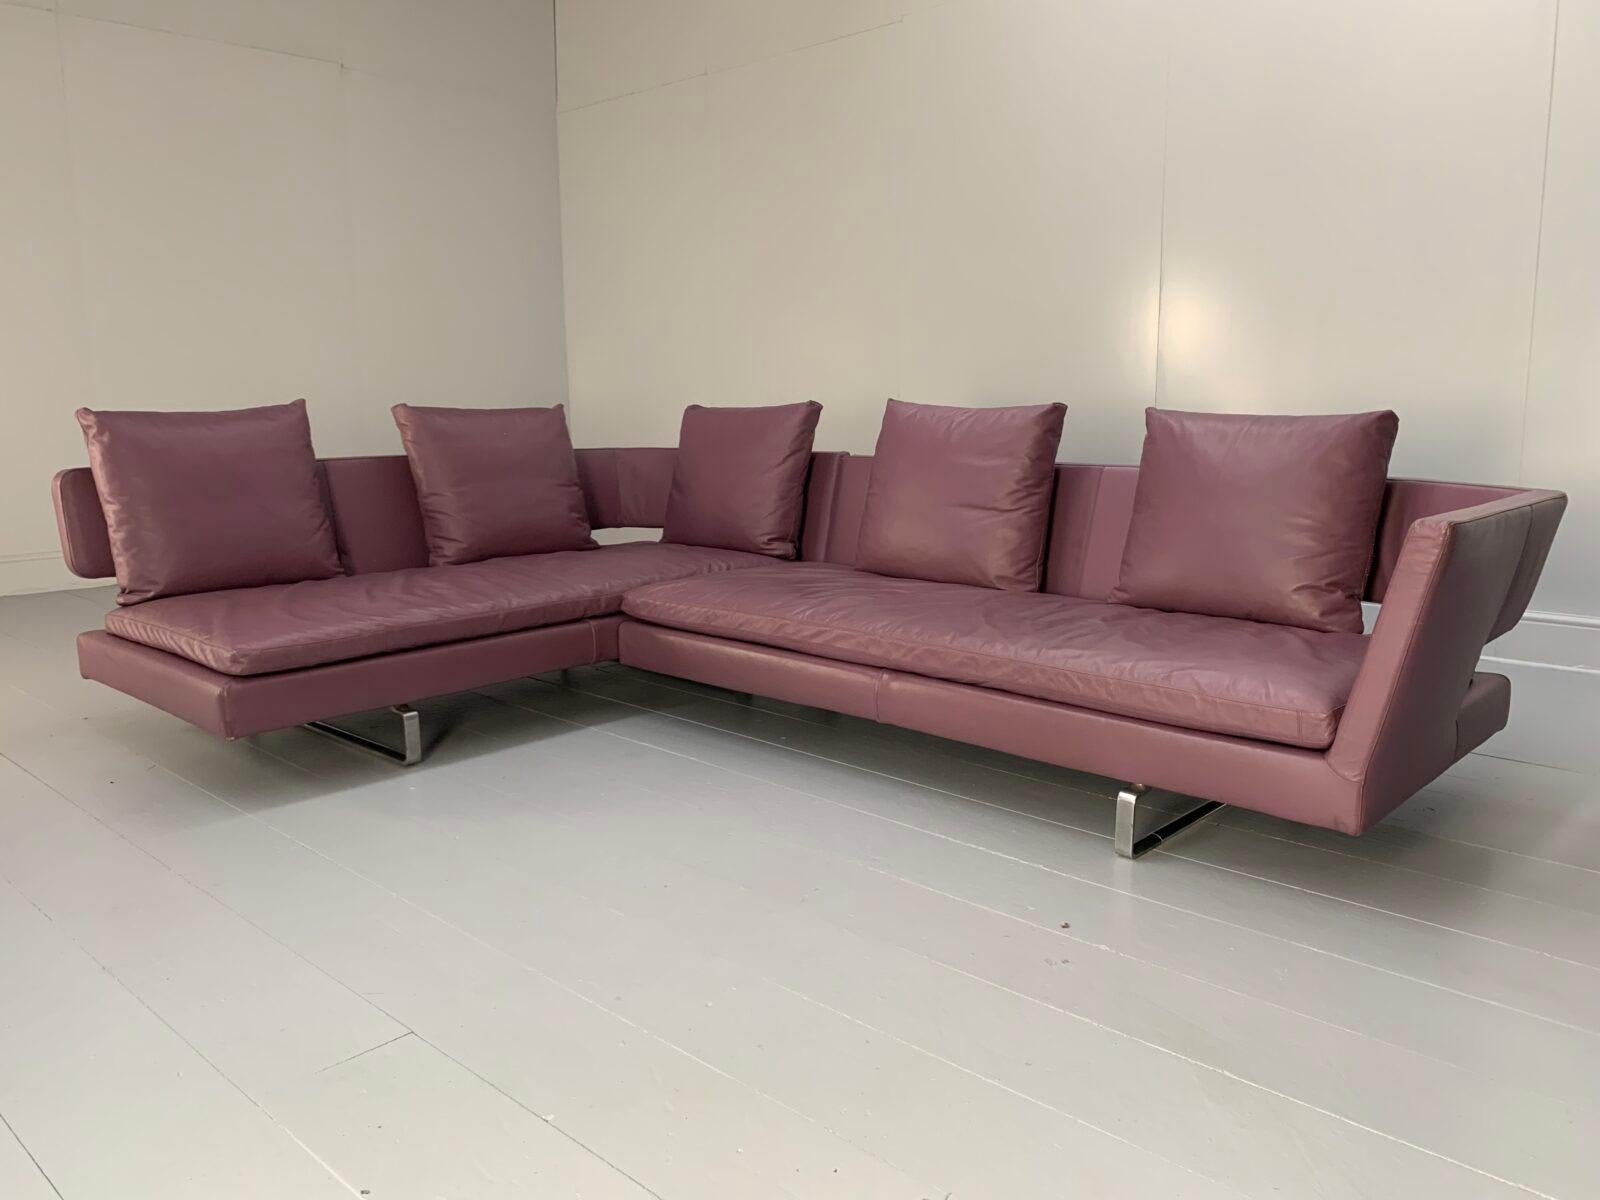 Hello Friends, and welcome to another unmissable offering from Lord Browns Furniture, the UK’s premier resource for fine Sofas and Chairs.
On offer on this occasion is quite a thing, it being a sublime, rare “Arne” L-Shape 6-Seat Sofa from the world